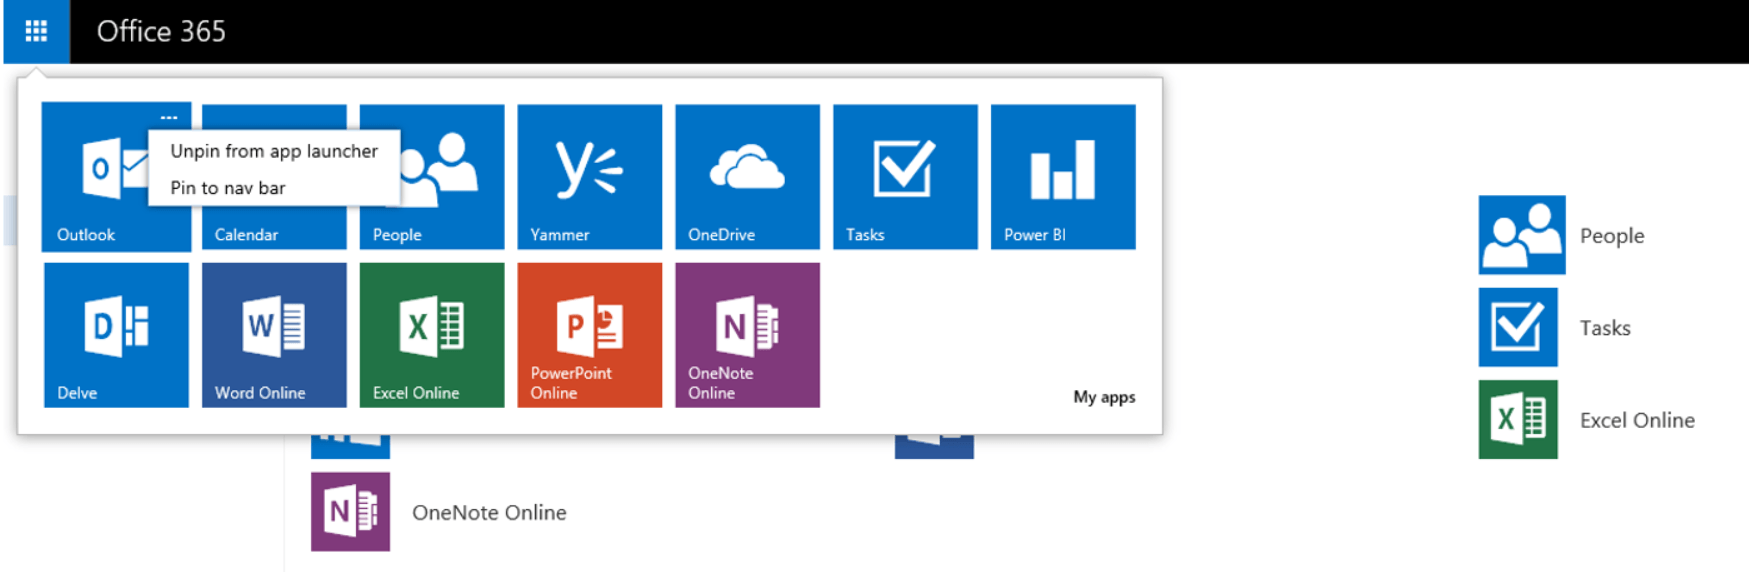 Office Apps Logo - Organize your Office 365 with the new app launcher - Microsoft 365 Blog